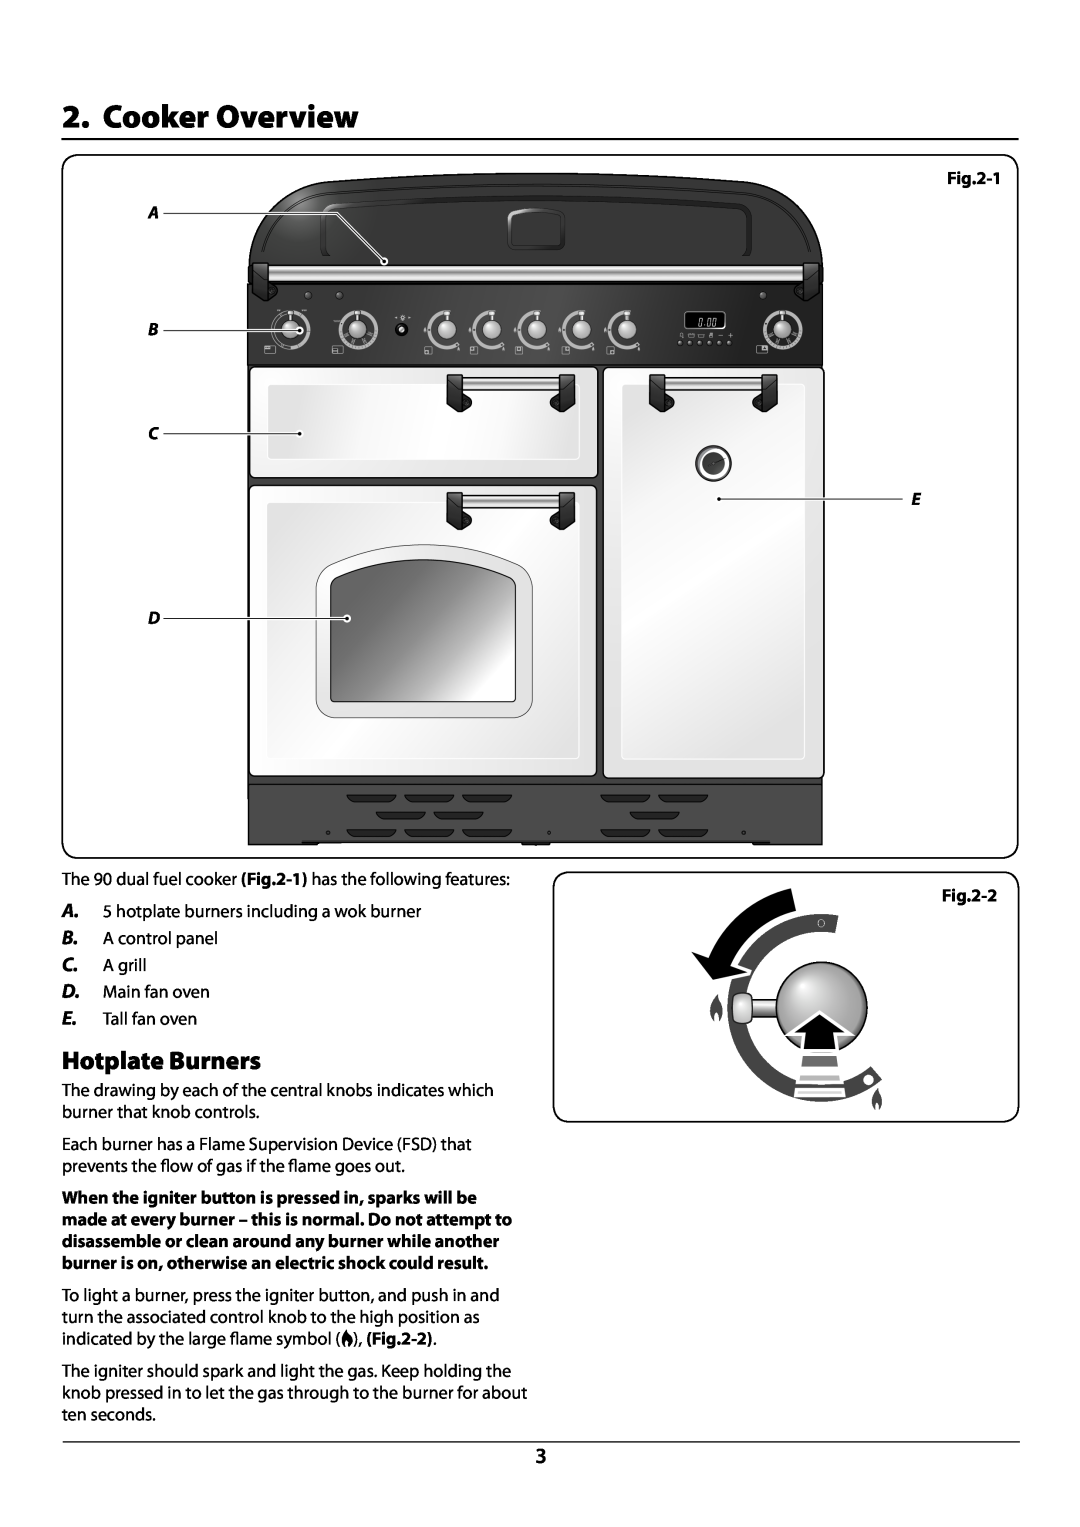 Falcon U108610-07 installation instructions Cooker Overview, Hotplate Burners, A B C D, 2 